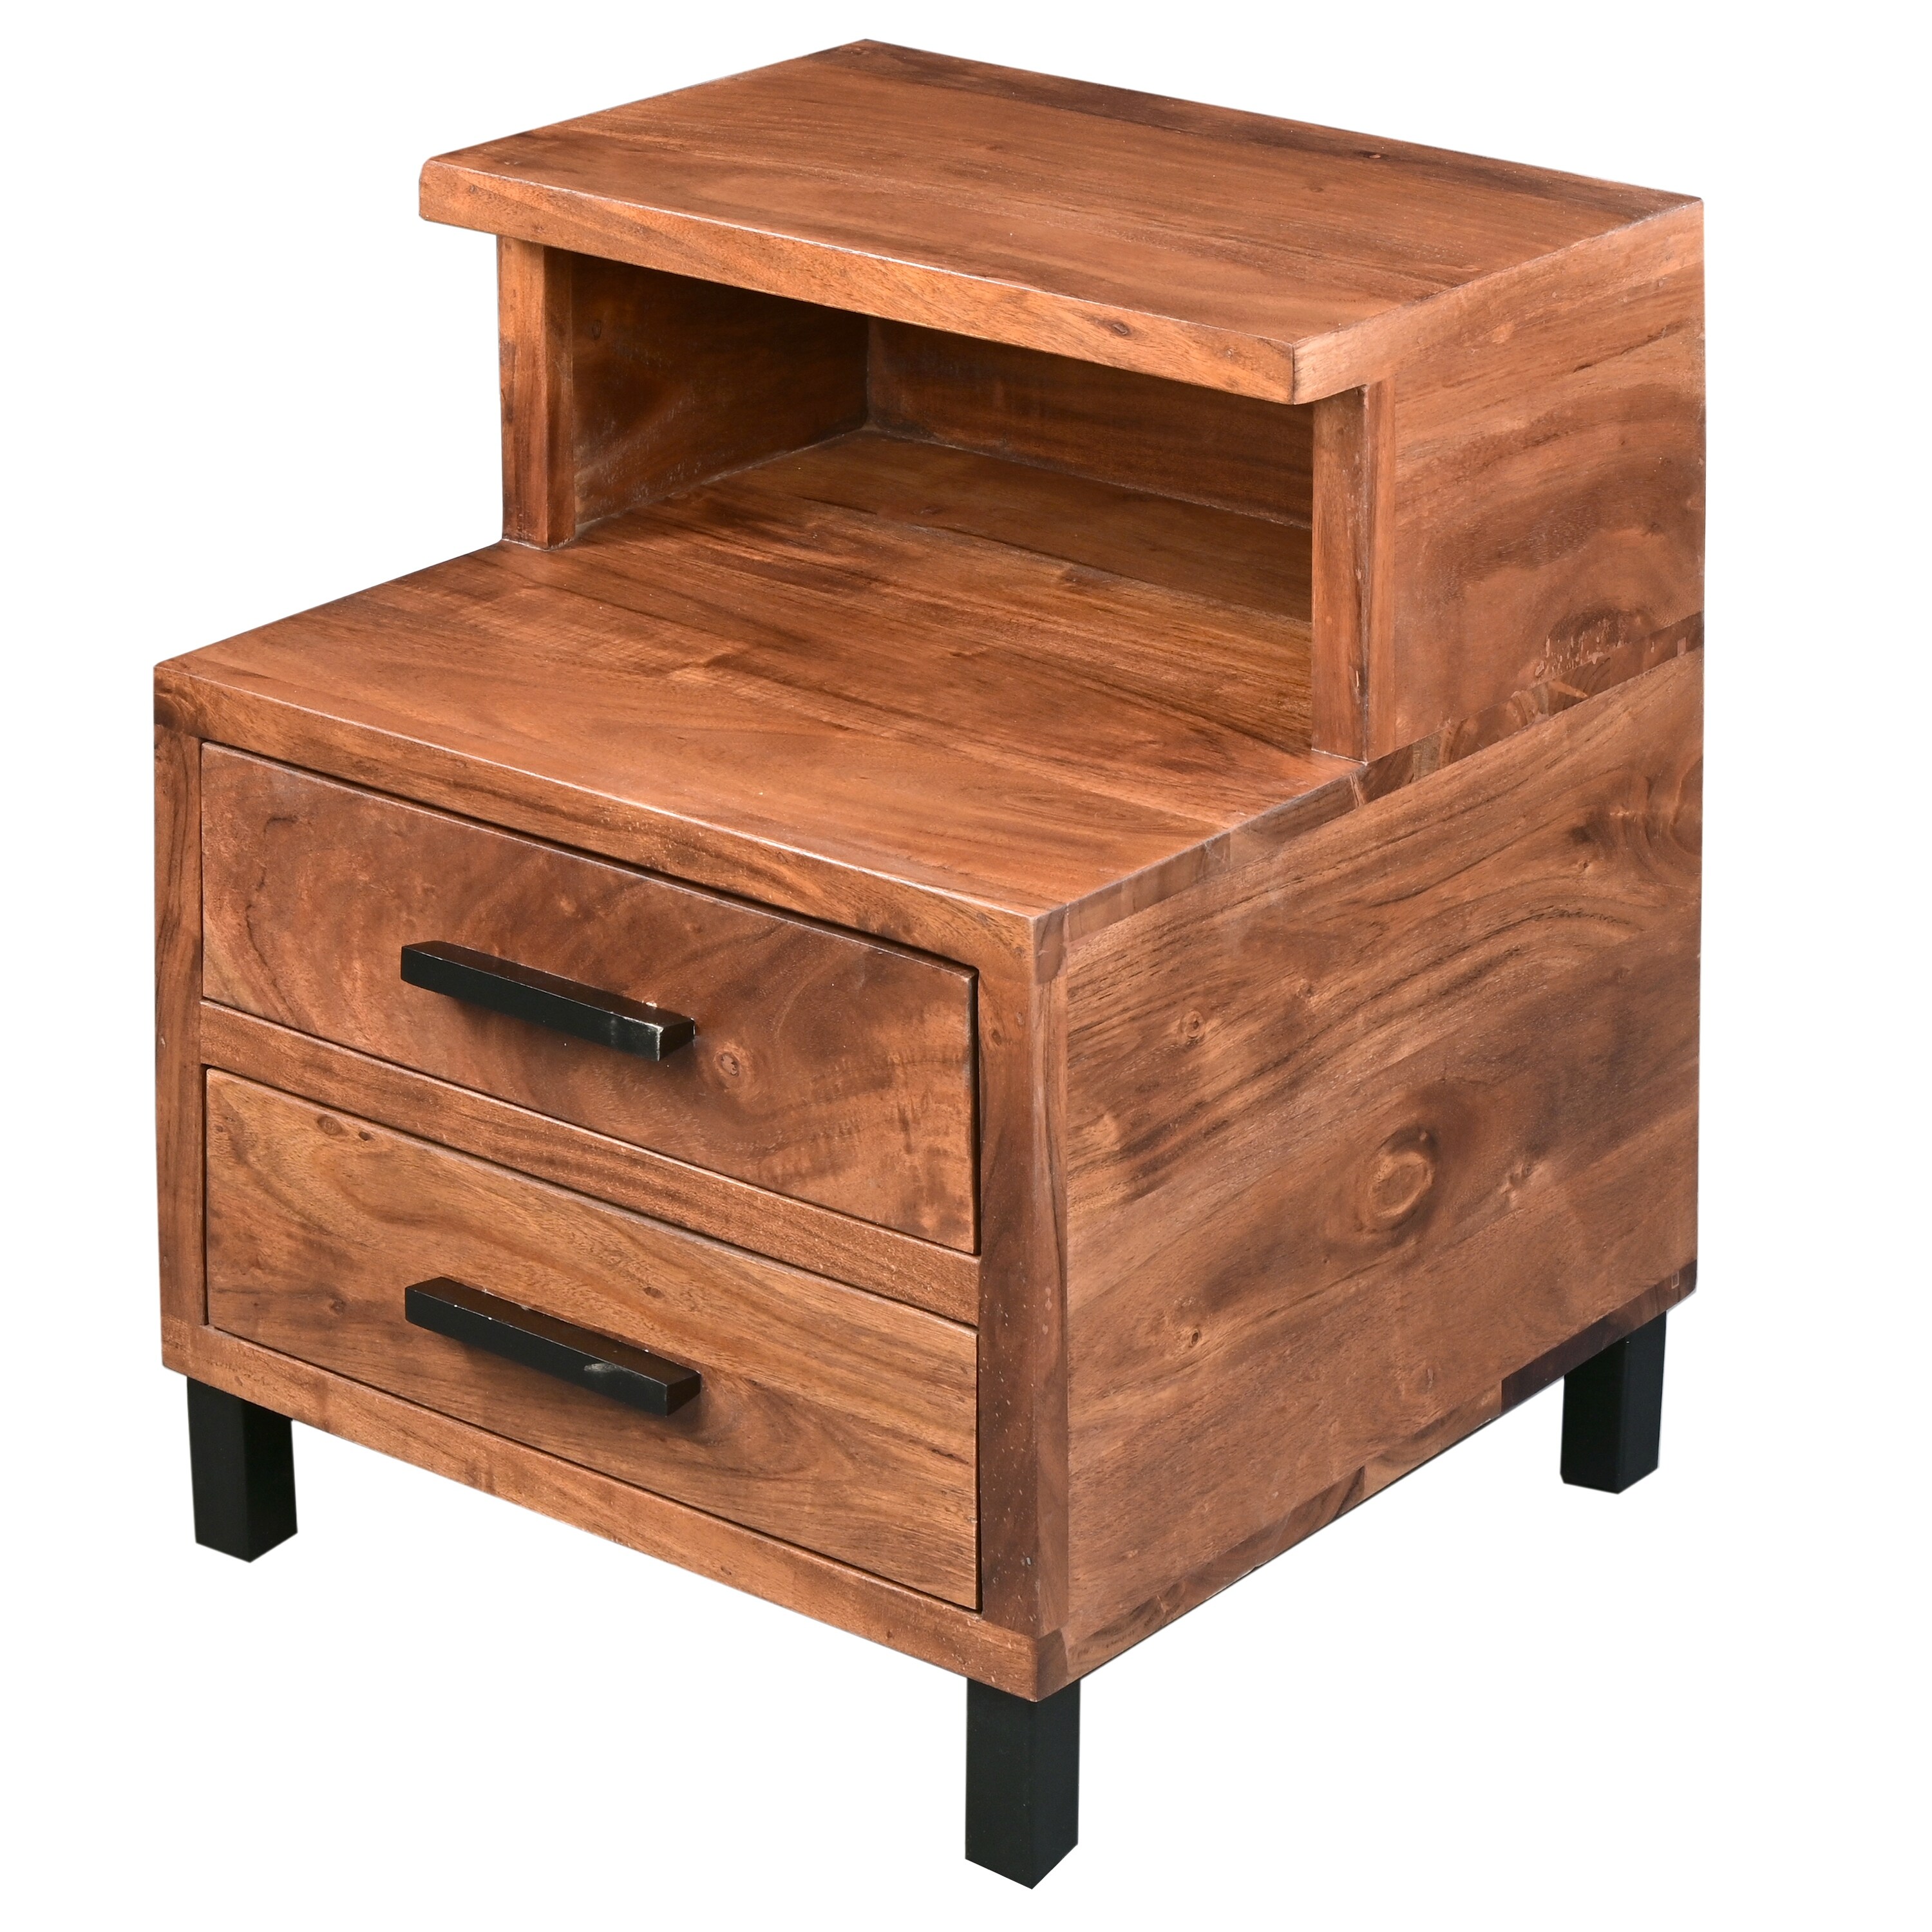 22 Inch Acacia Wood Nightstand, Bedside Table with 2 Drawers and Open Cubby, Walnut Brown - image 3 of 5